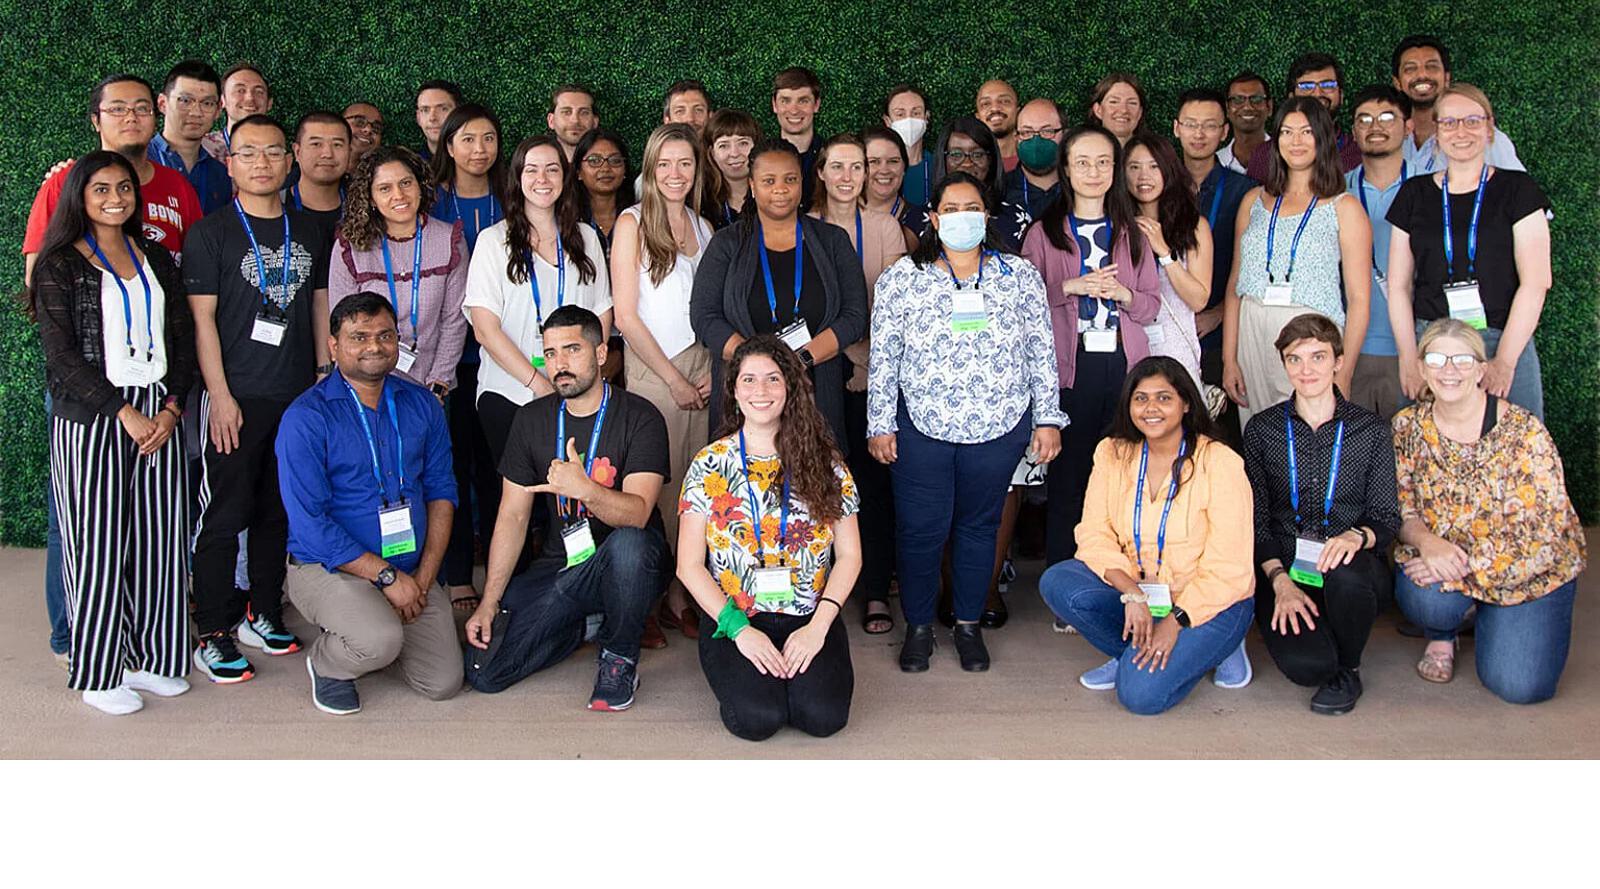 Group photo of postdoctoral researchers at the Stowers Institute